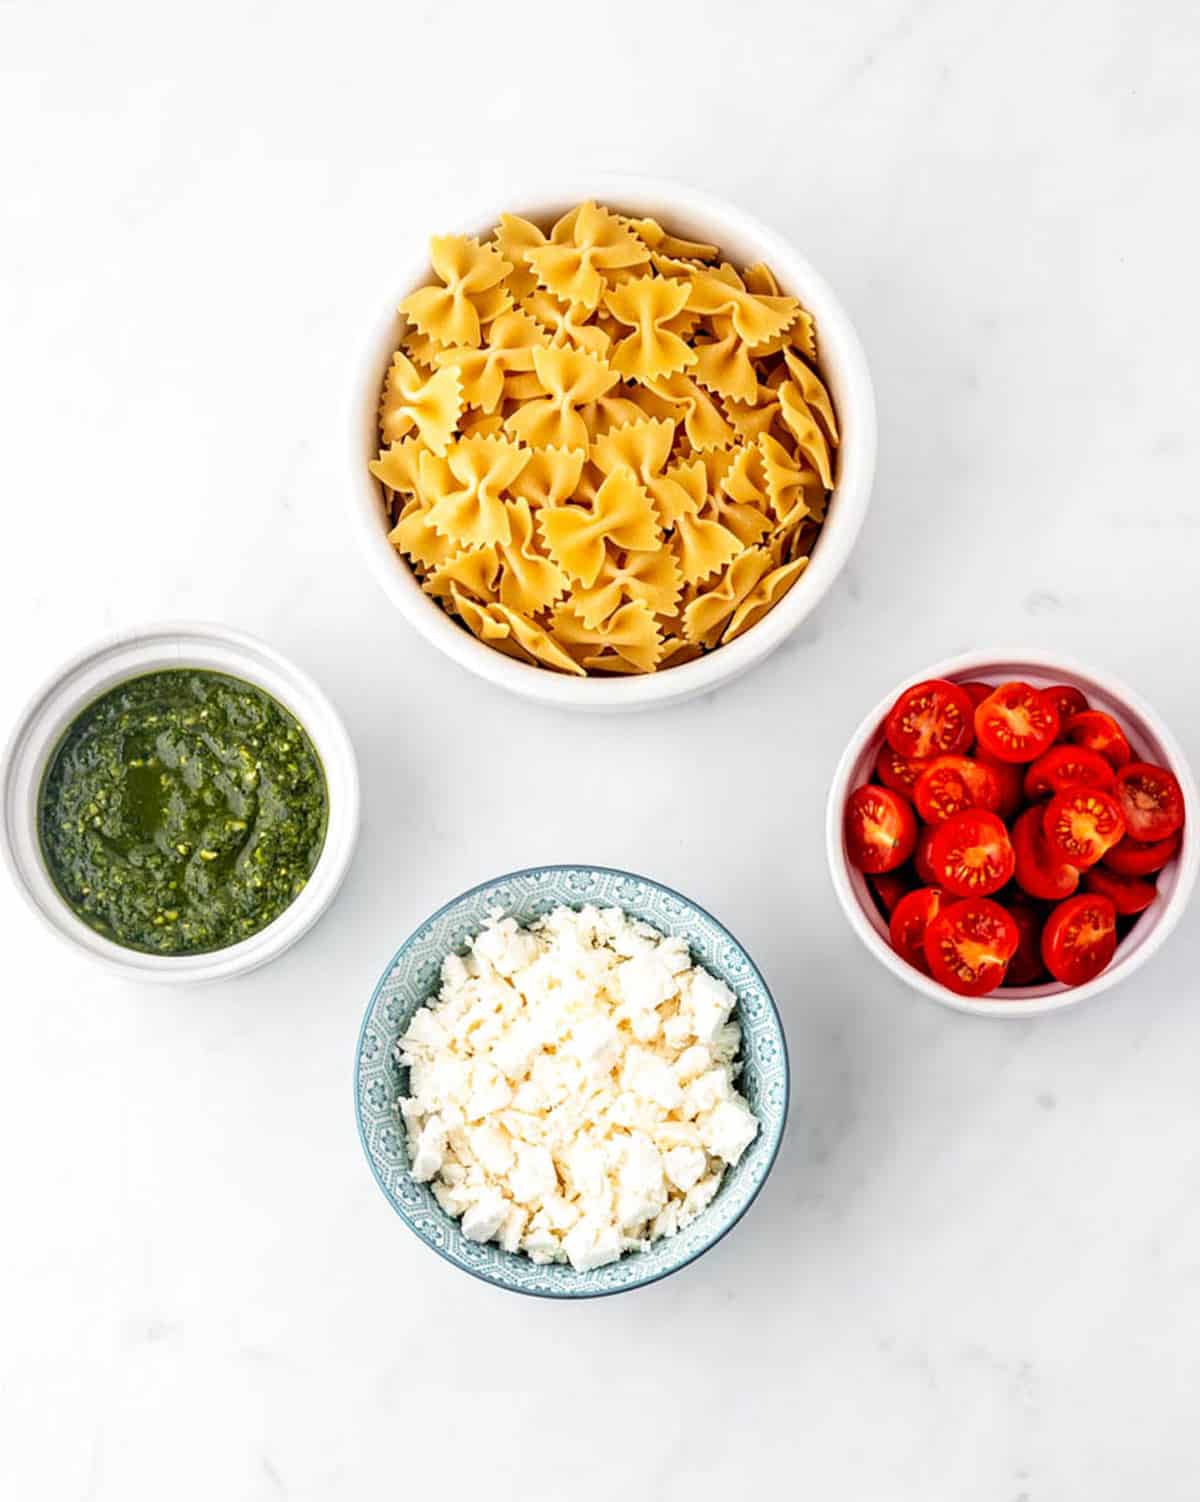 Bowtie pasta, tomatoes, feta cheese and pesto in bowls for the 4 ingredient pasta salad recipe.